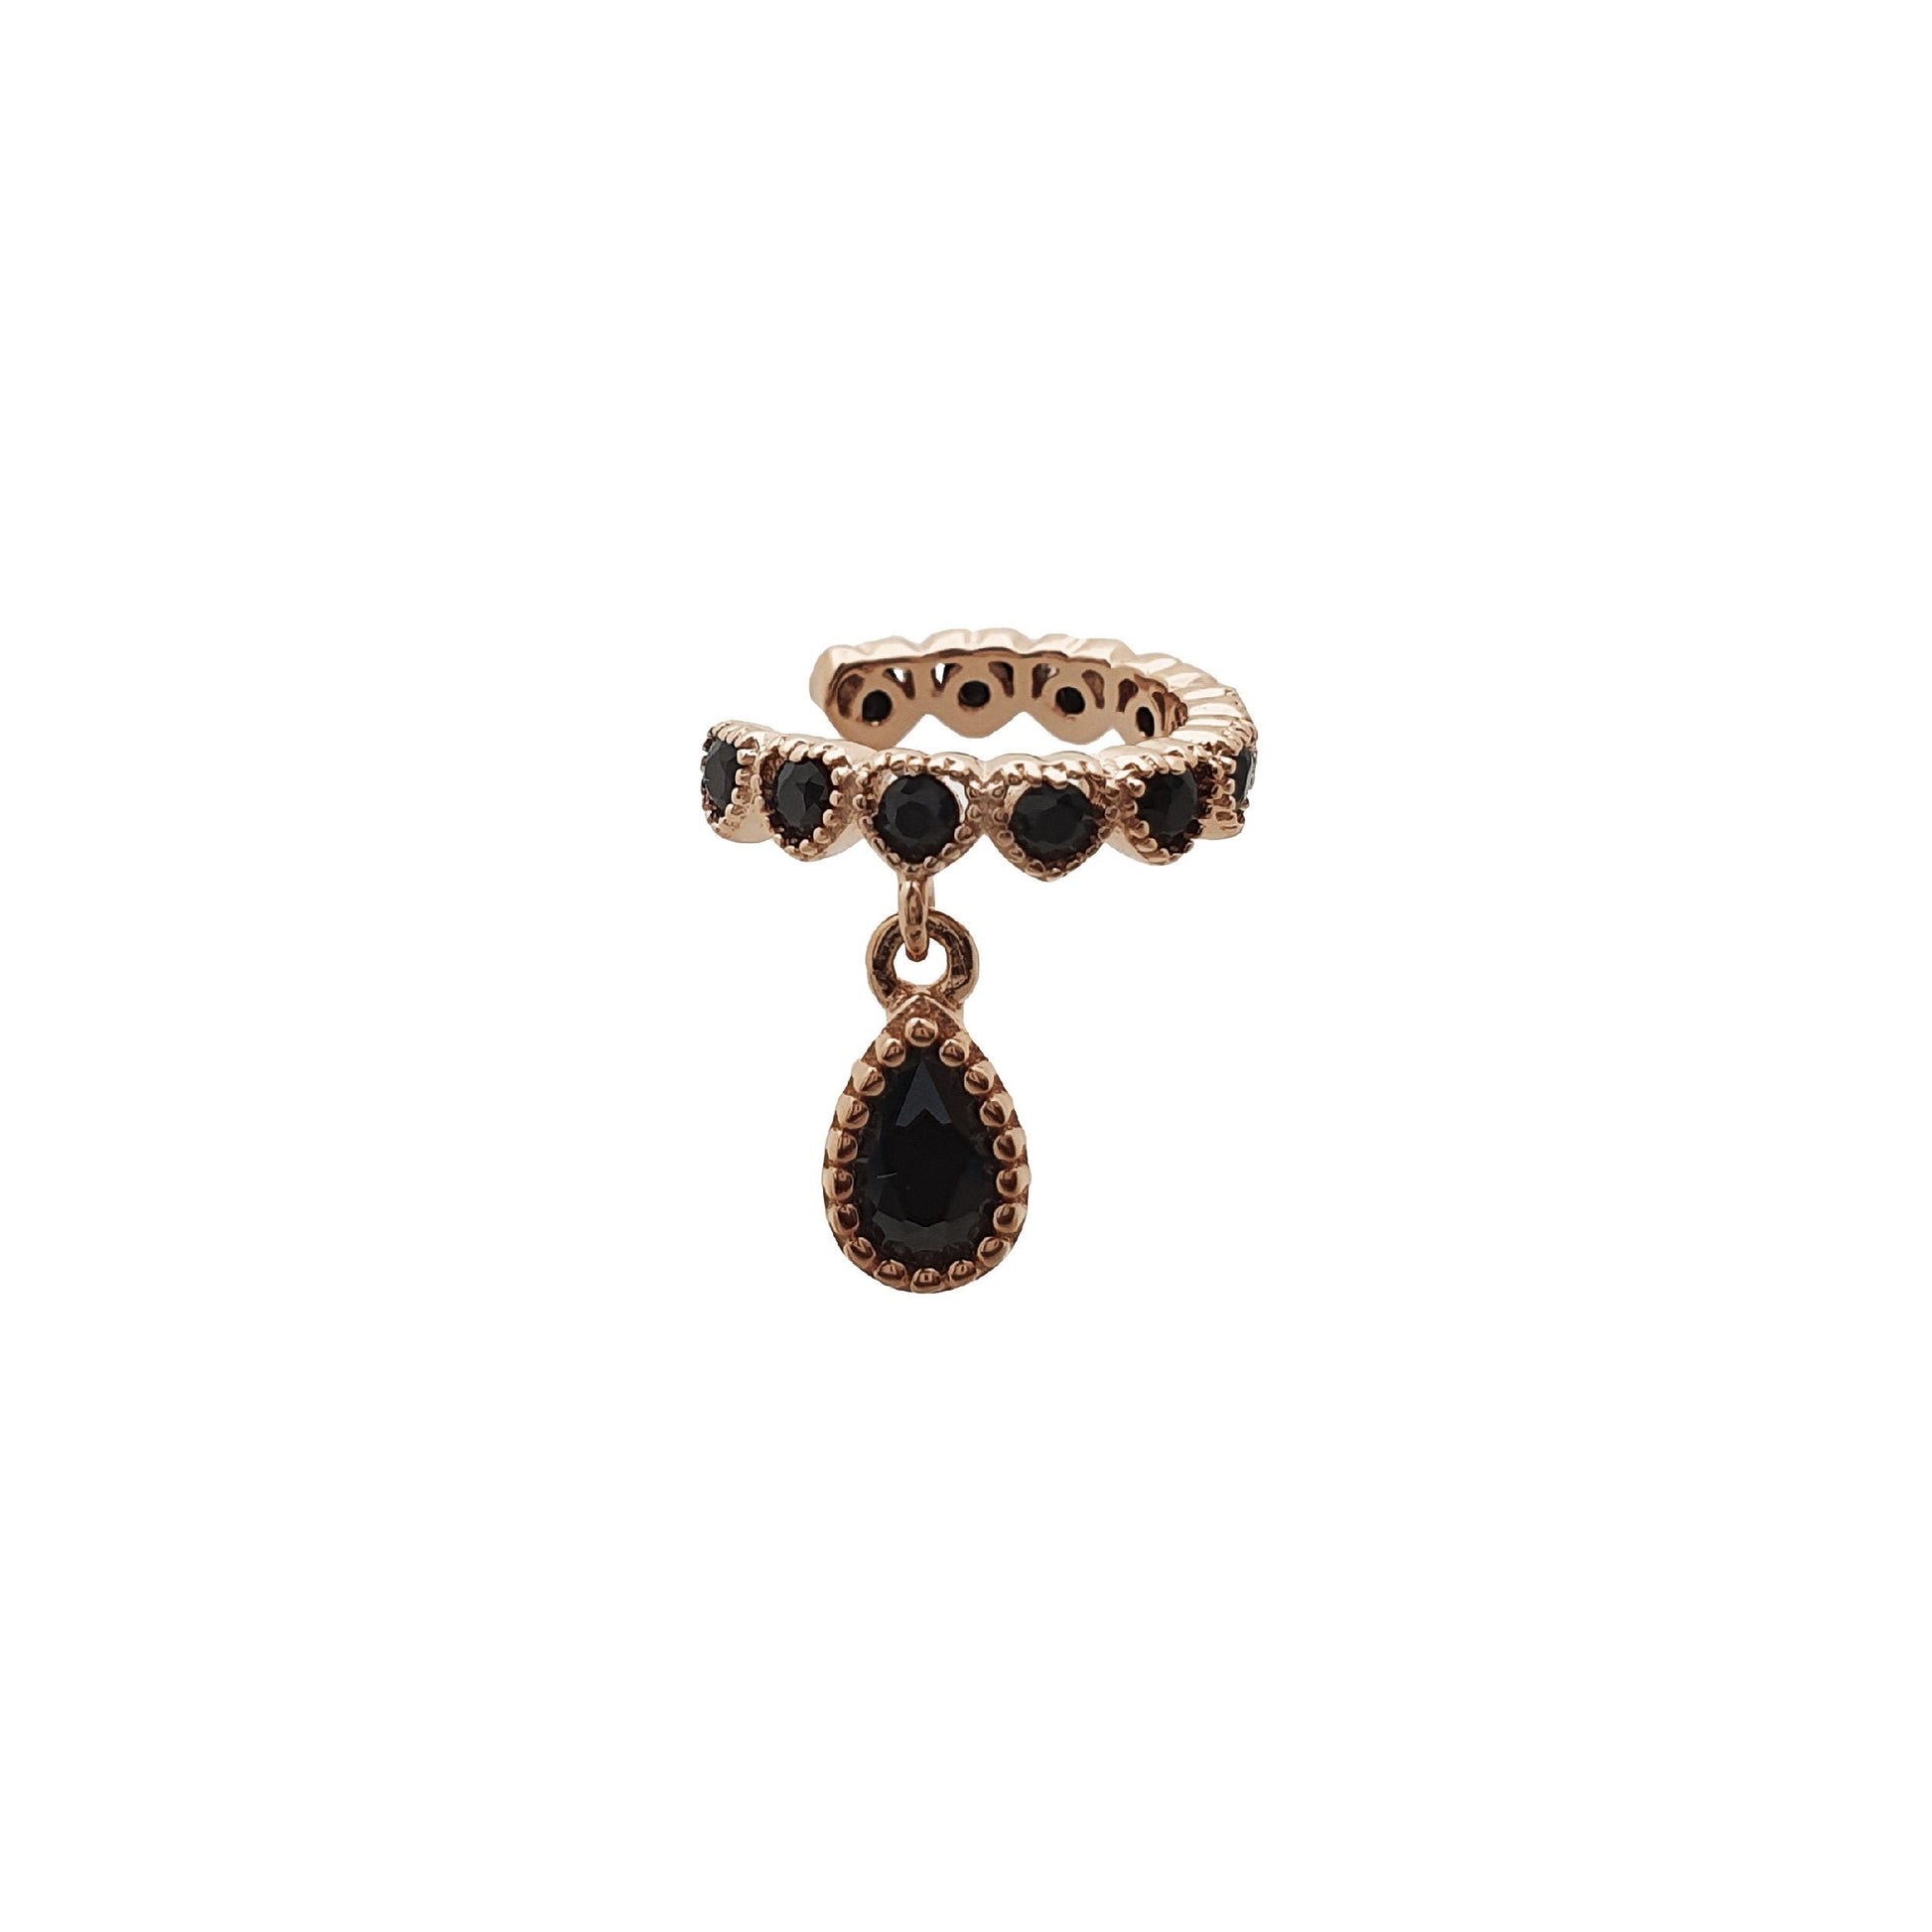 Cute and Original Ear Cuff / Conch Earring with Black Zirconias - Nelissima Jewelry